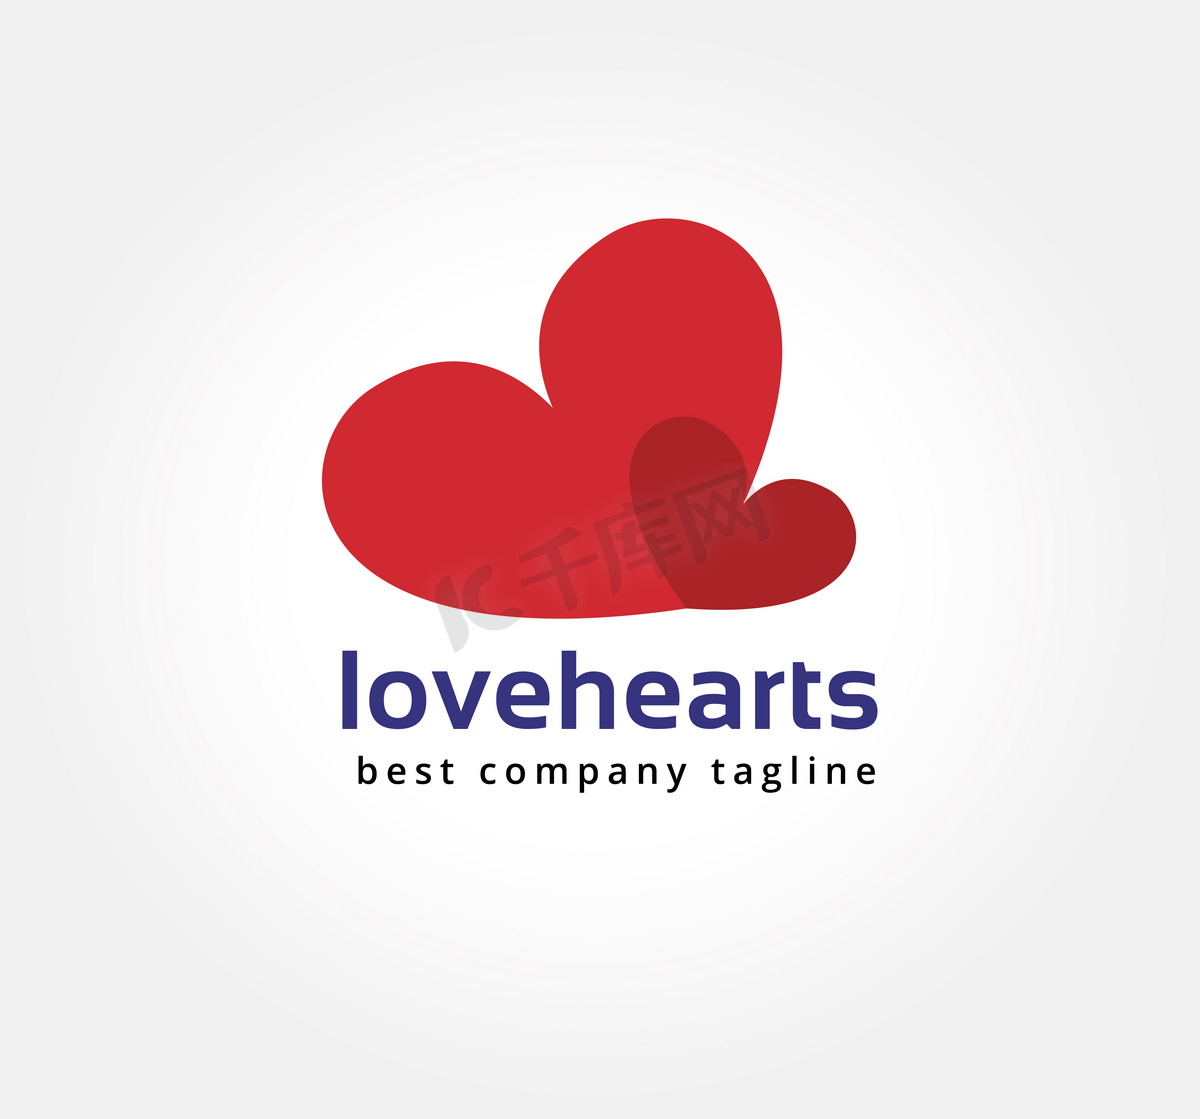 Abstract two hearts logo icon concept. Logotype template for branding and corporate design图片